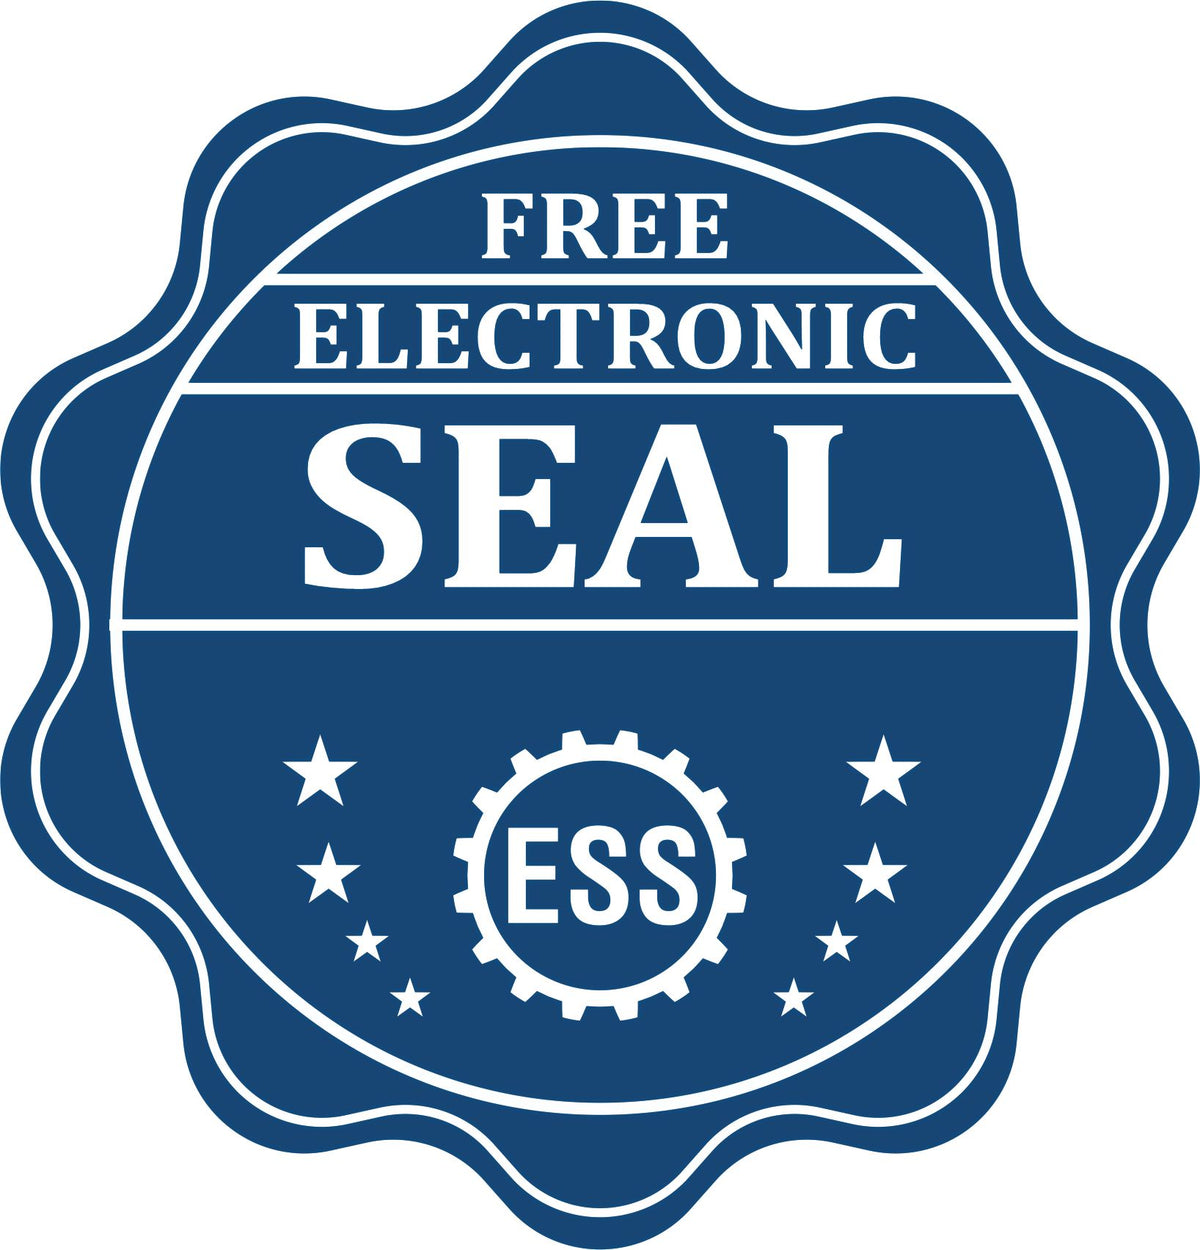 A badge showing a free electronic seal for the Premium MaxLight Pre-Inked Iowa Engineering Stamp with stars and the ESS gear on the emblem.